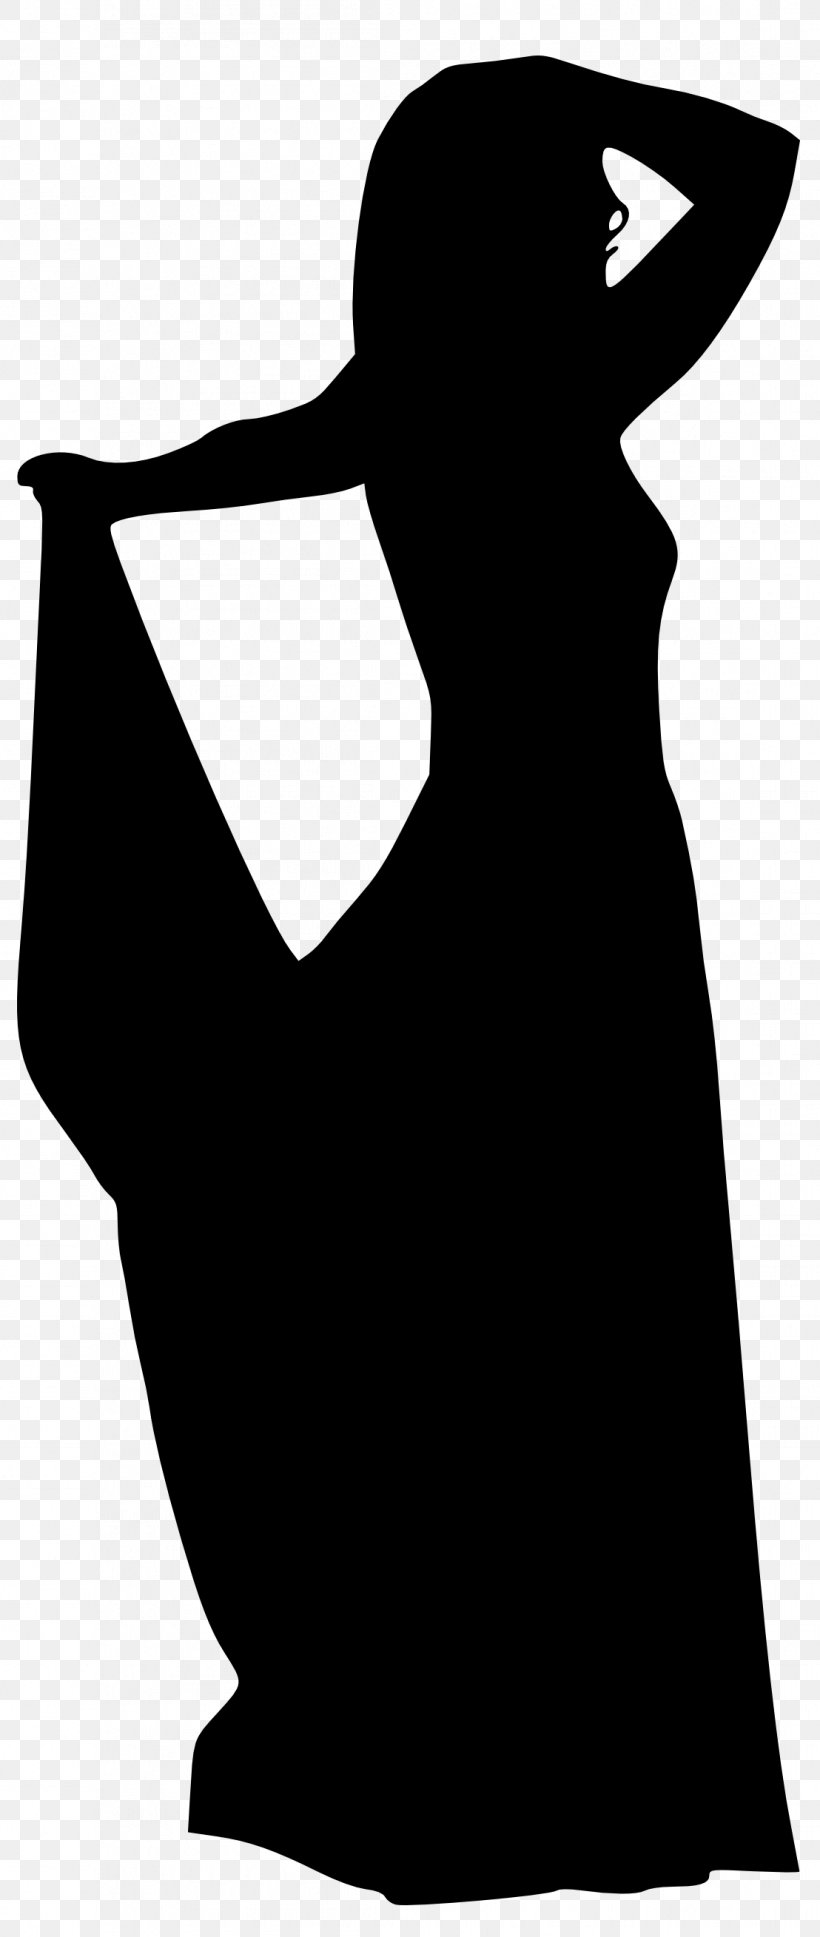 Silhouette Woman Monochrome Photography, PNG, 1108x2618px, Silhouette, Art, Artwork, Black, Black And White Download Free